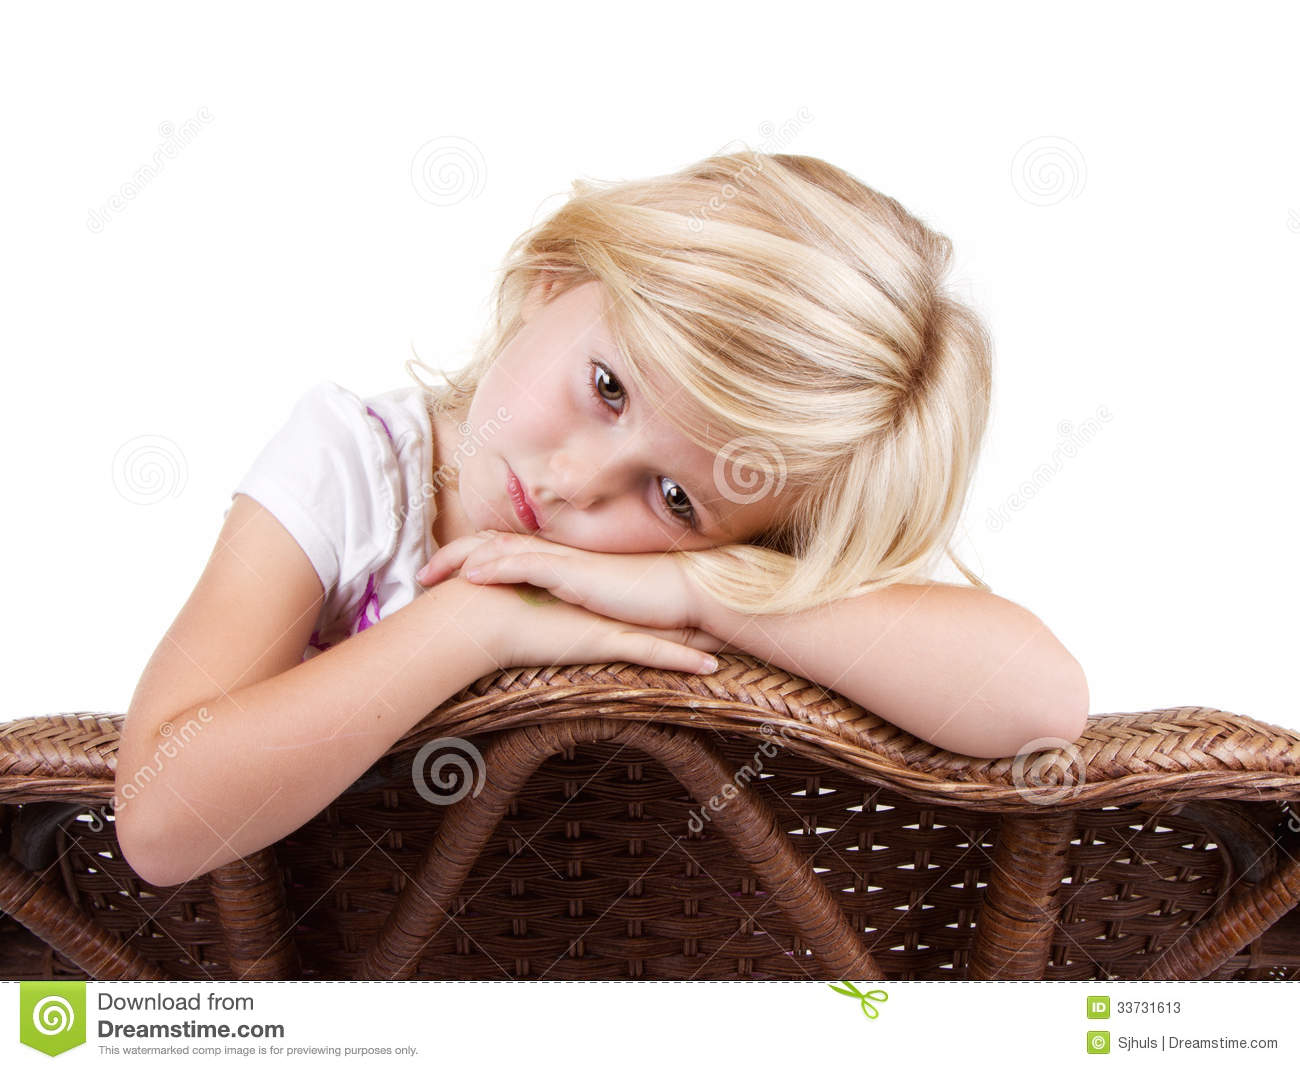 Little Girl Sitting In Chair With A Sad Or Lonely Look On Her Face    